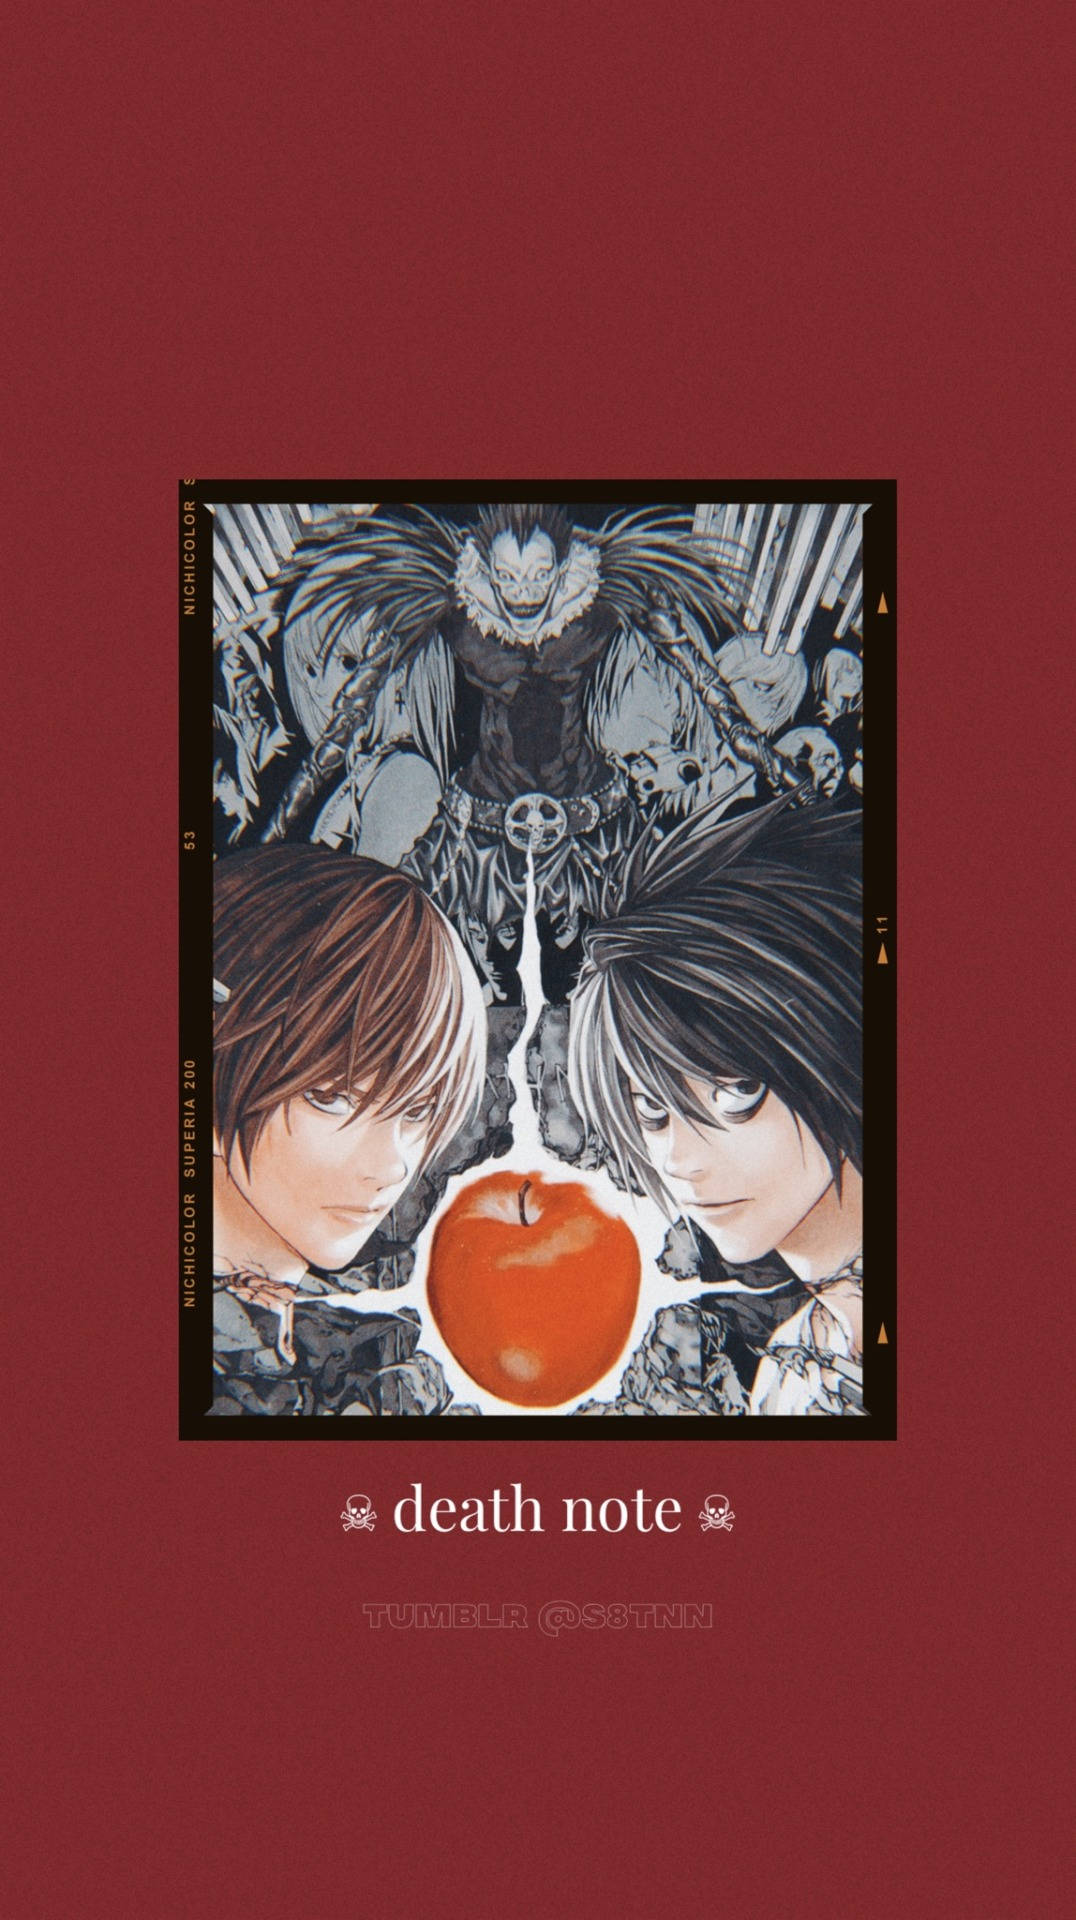 "Unlock the secrets of the Death Note and bring justice to the world." Wallpaper